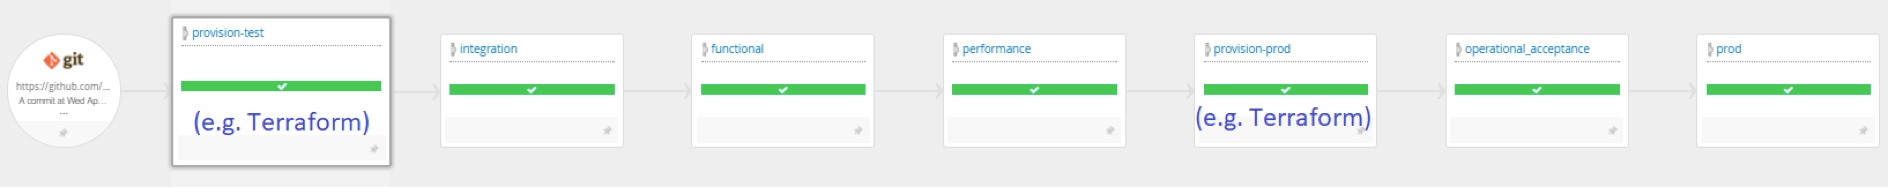 Target pipeline with automated provisioning screen shot